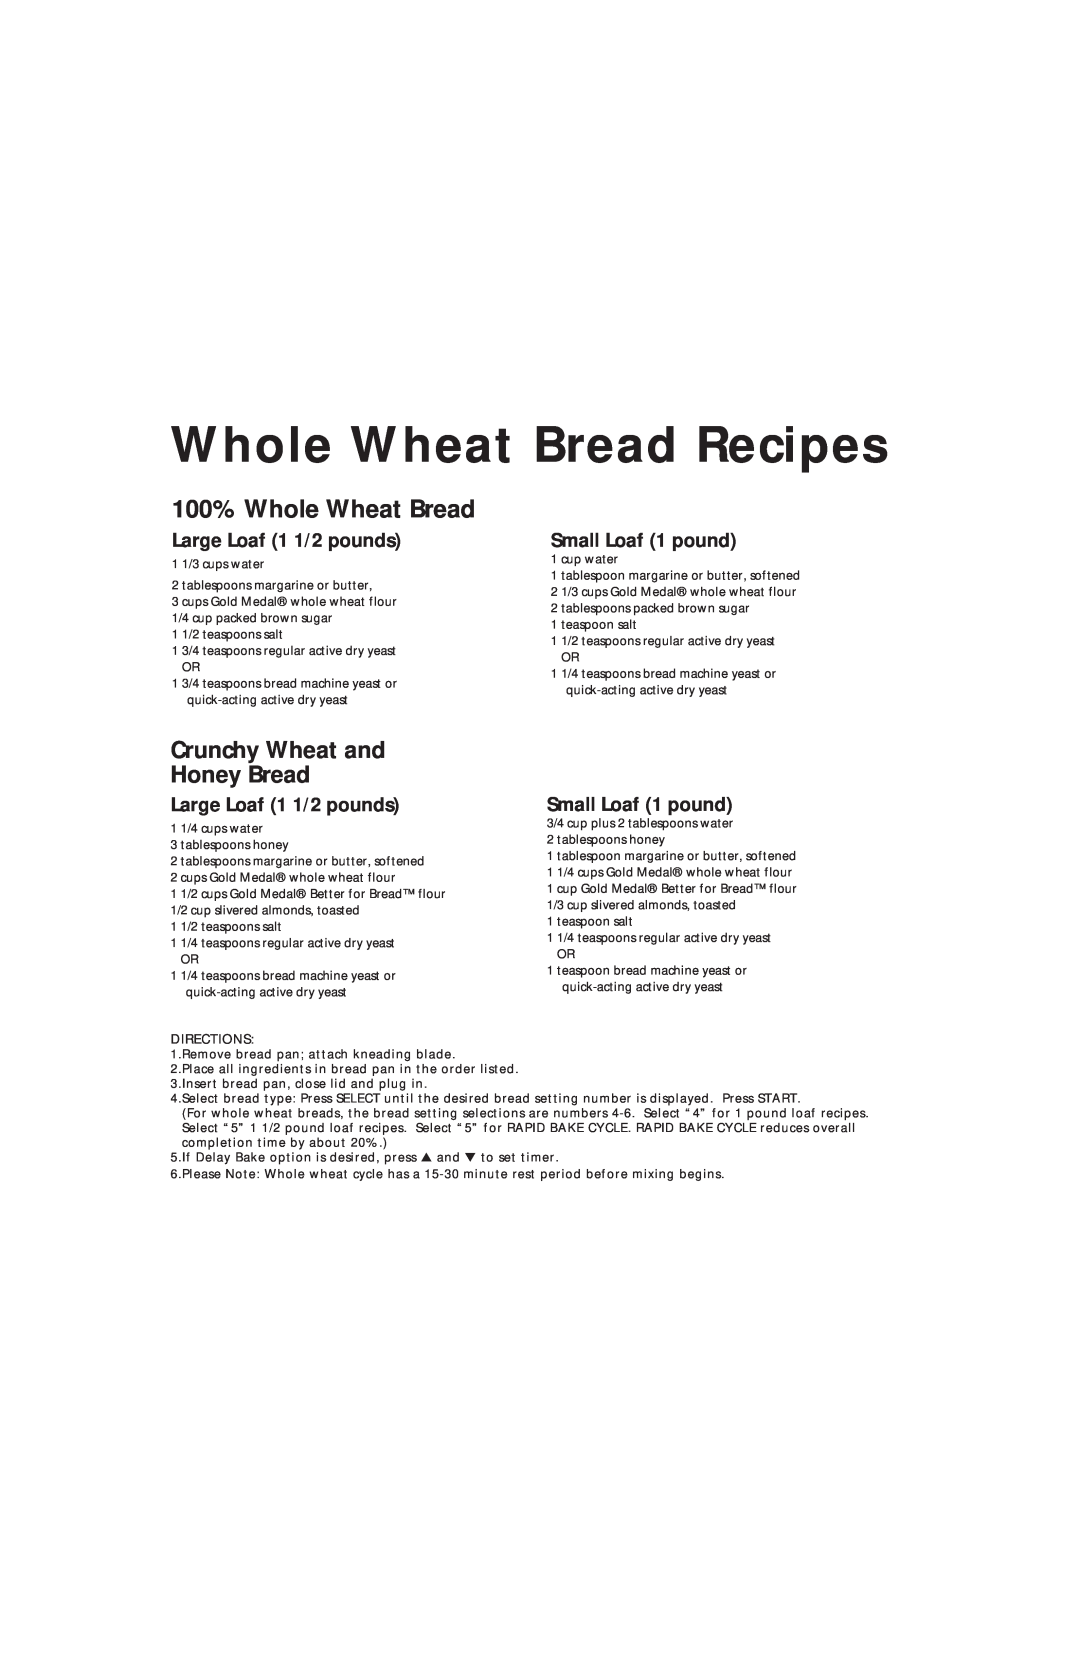 Oster Bread & Dough Maker manual Whole Wheat Bread Recipes, Crunchy Wheat and Honey Bread, Large Loaf 1 1/2 pounds 